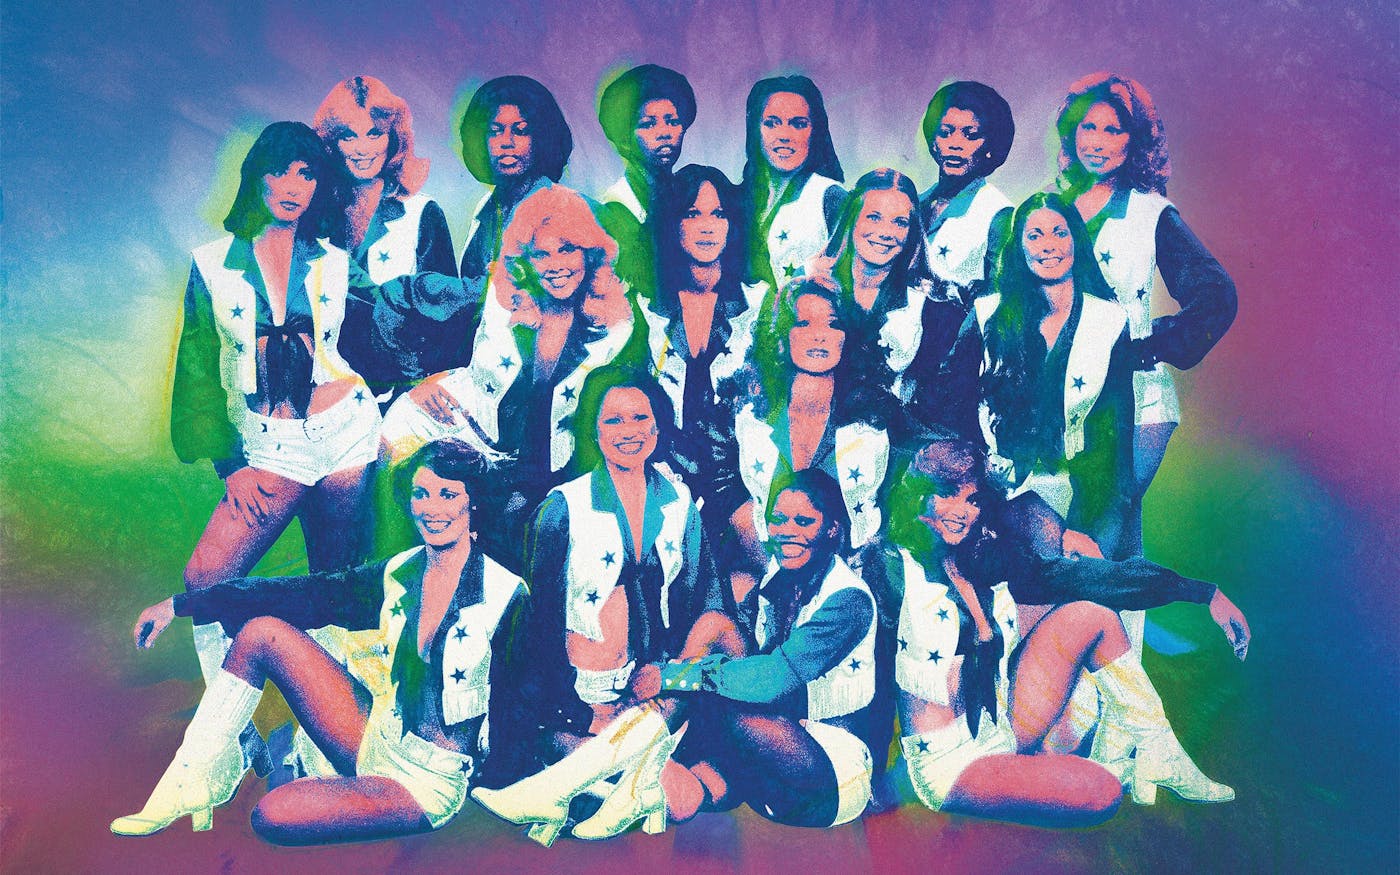 Drunk Girls Passed Out Violated - Sex, Scandal, and Sisterhood: Fifty Years of the Dallas Cowboys Cheerleaders